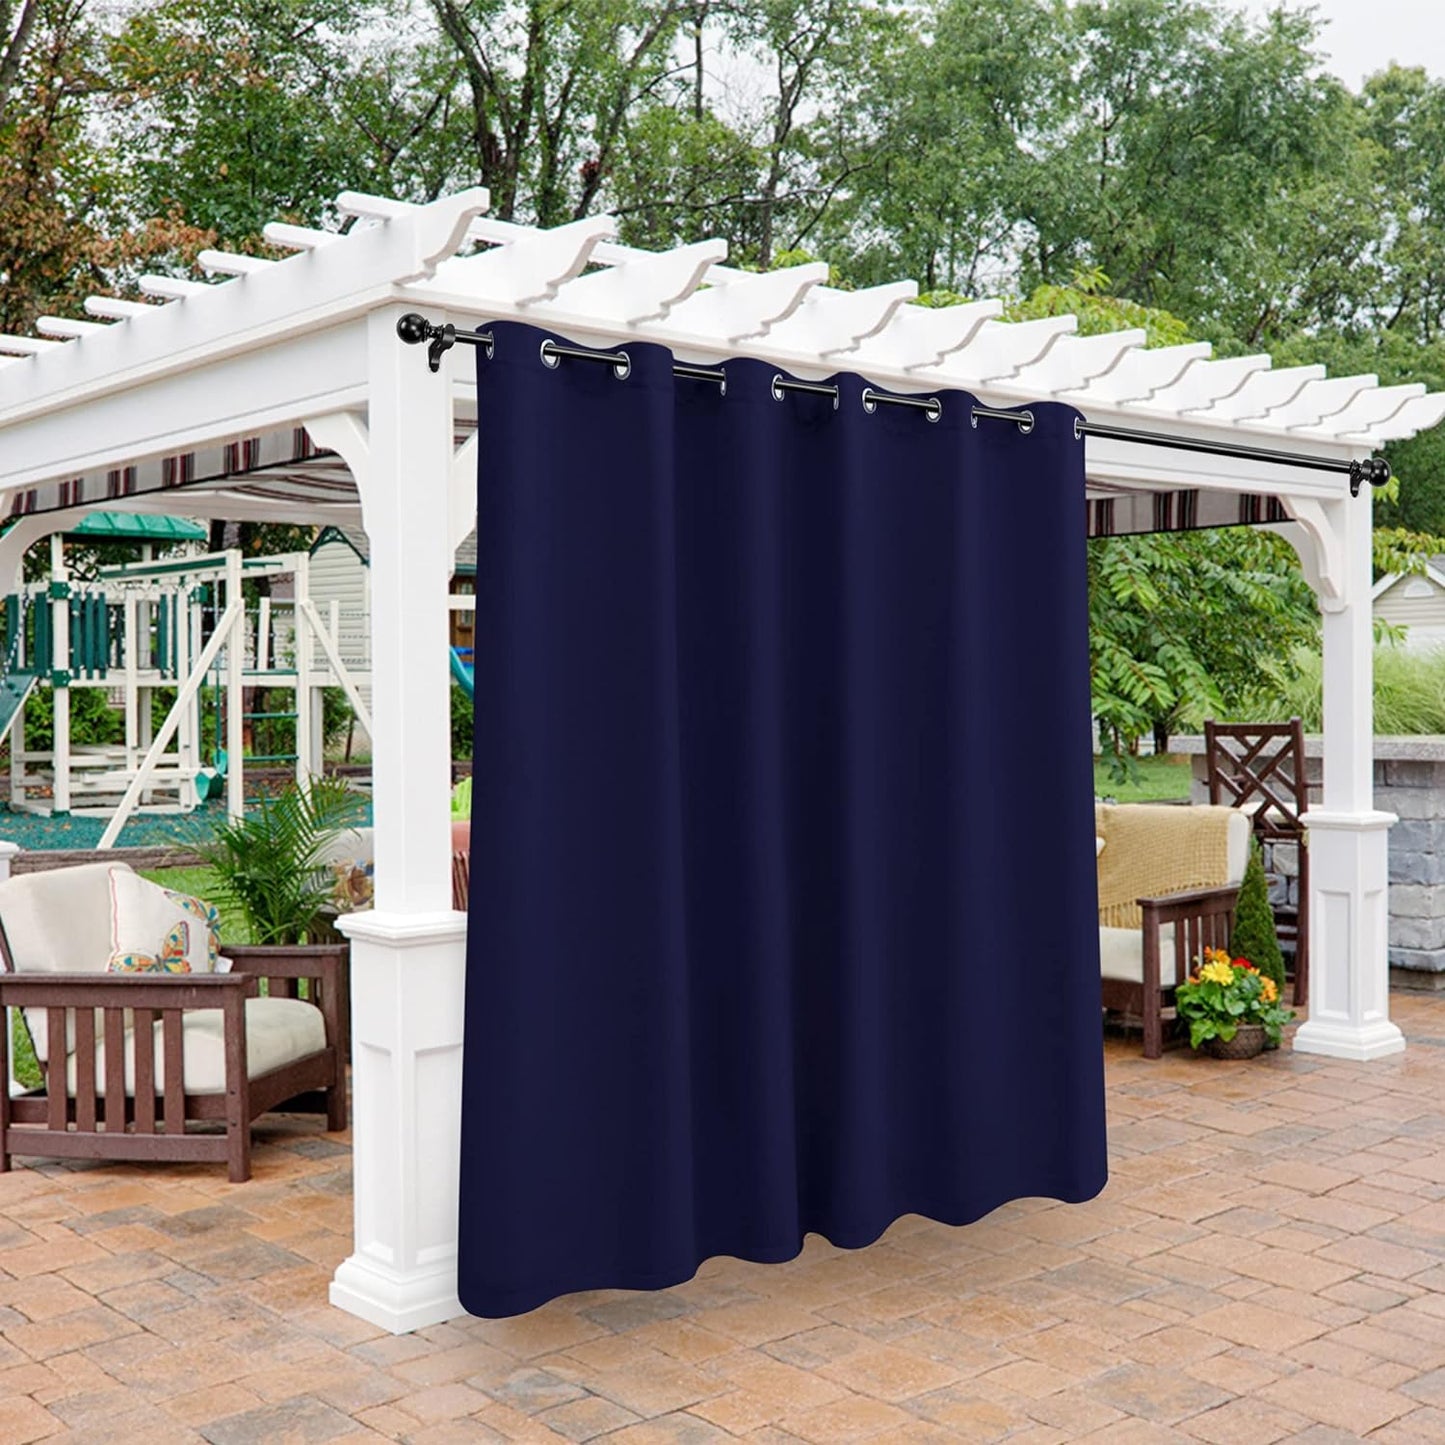 BONZER Outdoor Curtains for Patio Waterproof - Light Blocking Weather Resistant Privacy Grommet Blackout Curtains for Gazebo, Porch, Pergola, Cabana, Deck, Sunroom, 1 Panel, 52W X 84L Inch, Silver  BONZER Navy 100W X 95 Inch 